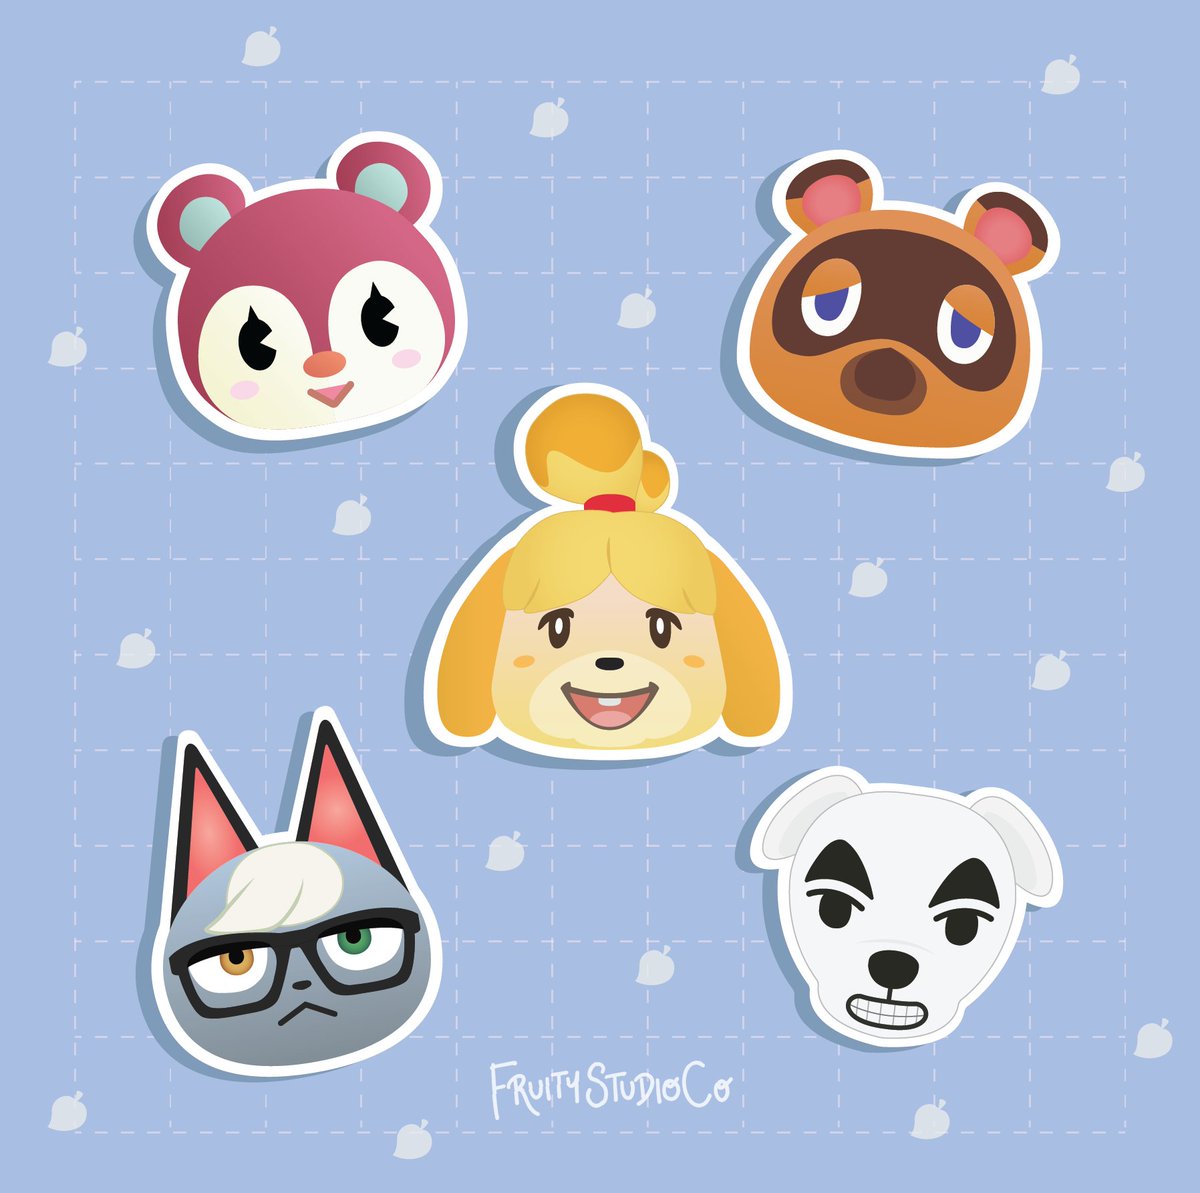 Hi, we're Crystal & Candy and we make kawaii stickers! We've been friends since high school and decided to open up a sticker store together Shop:  http://www.fruitystudioco.com 